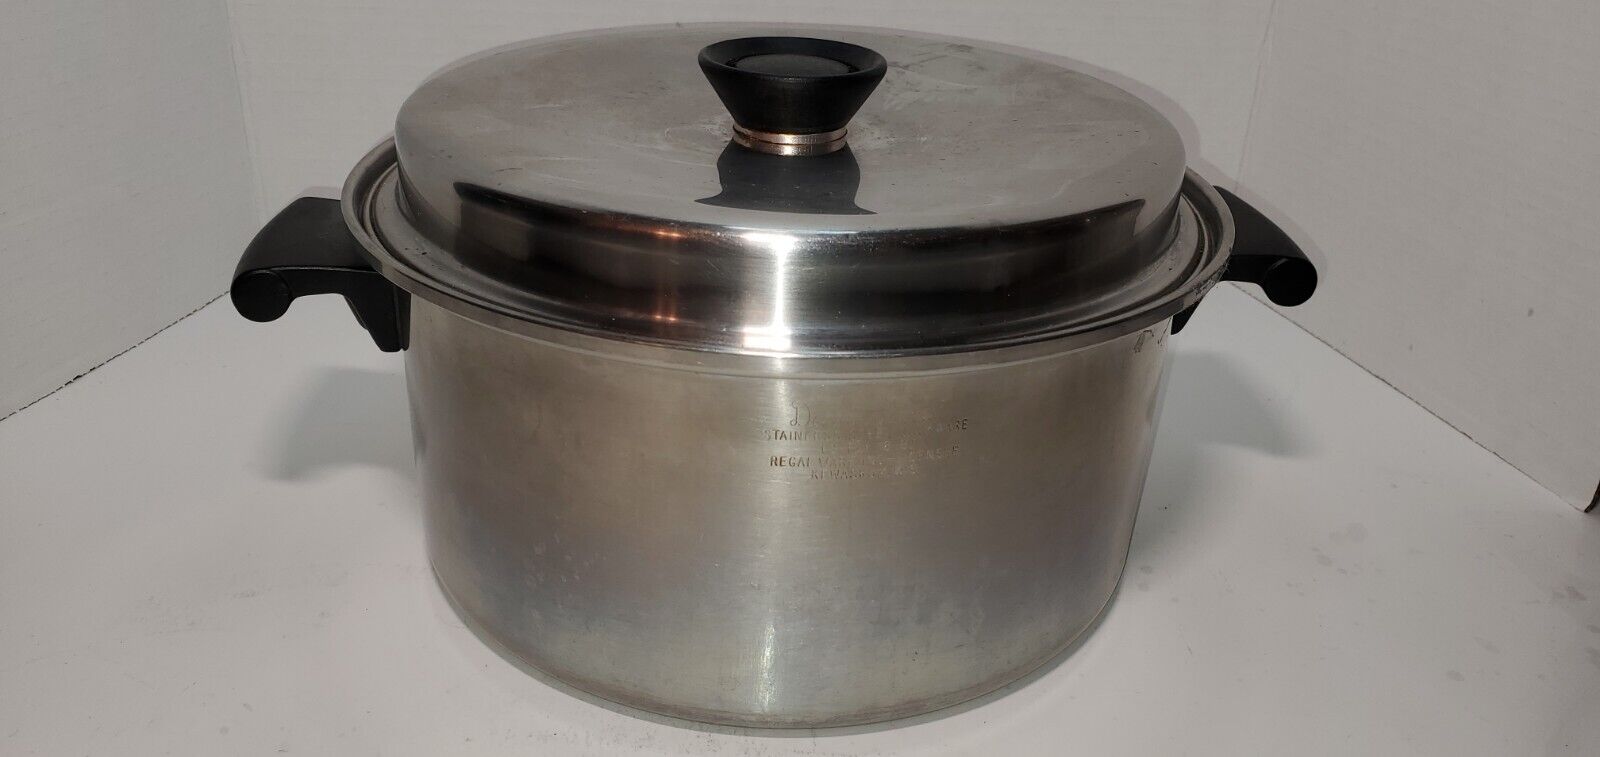 VTG Duncan Hines 3 Ply 18-8 Stainless Steel Stock Pot USA Made Regal Ware 10.5\